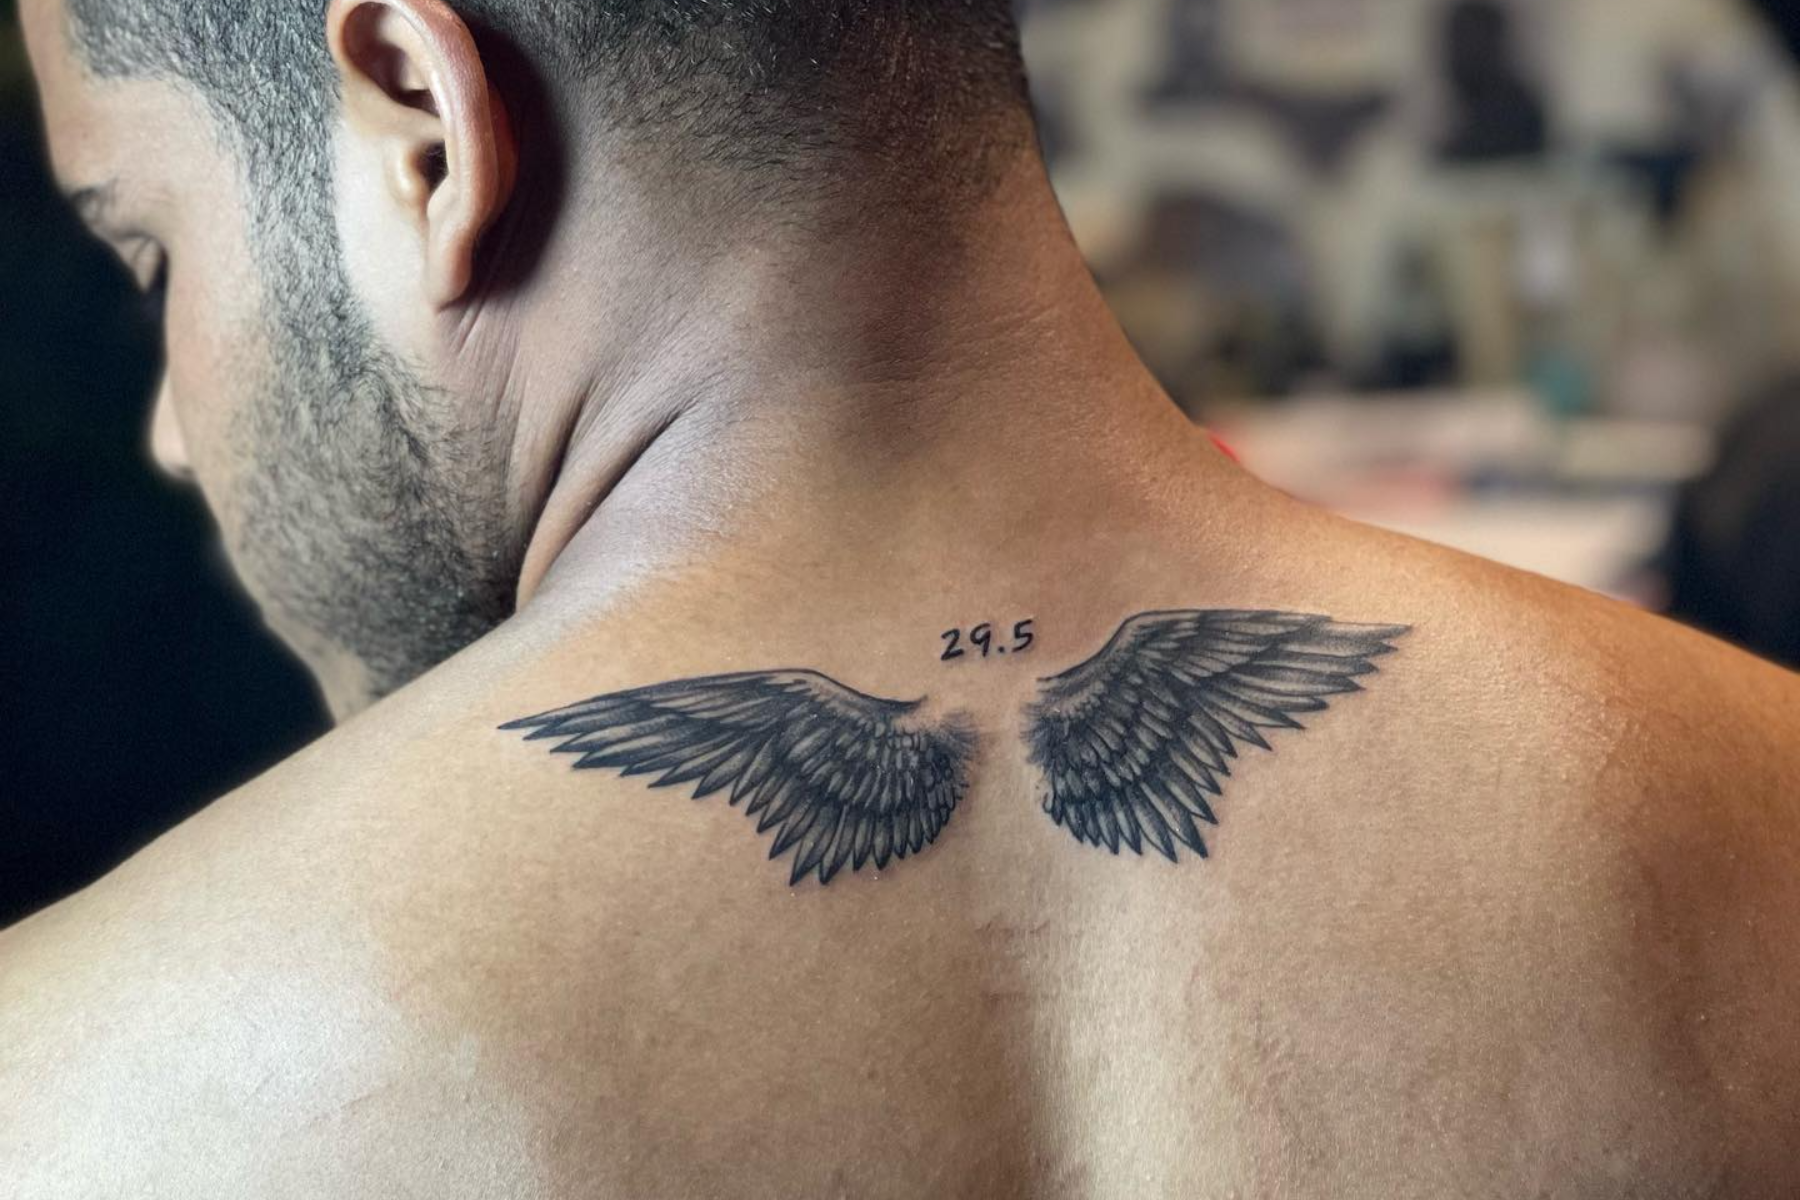 A man is donning a small wing tattoo on his upper back